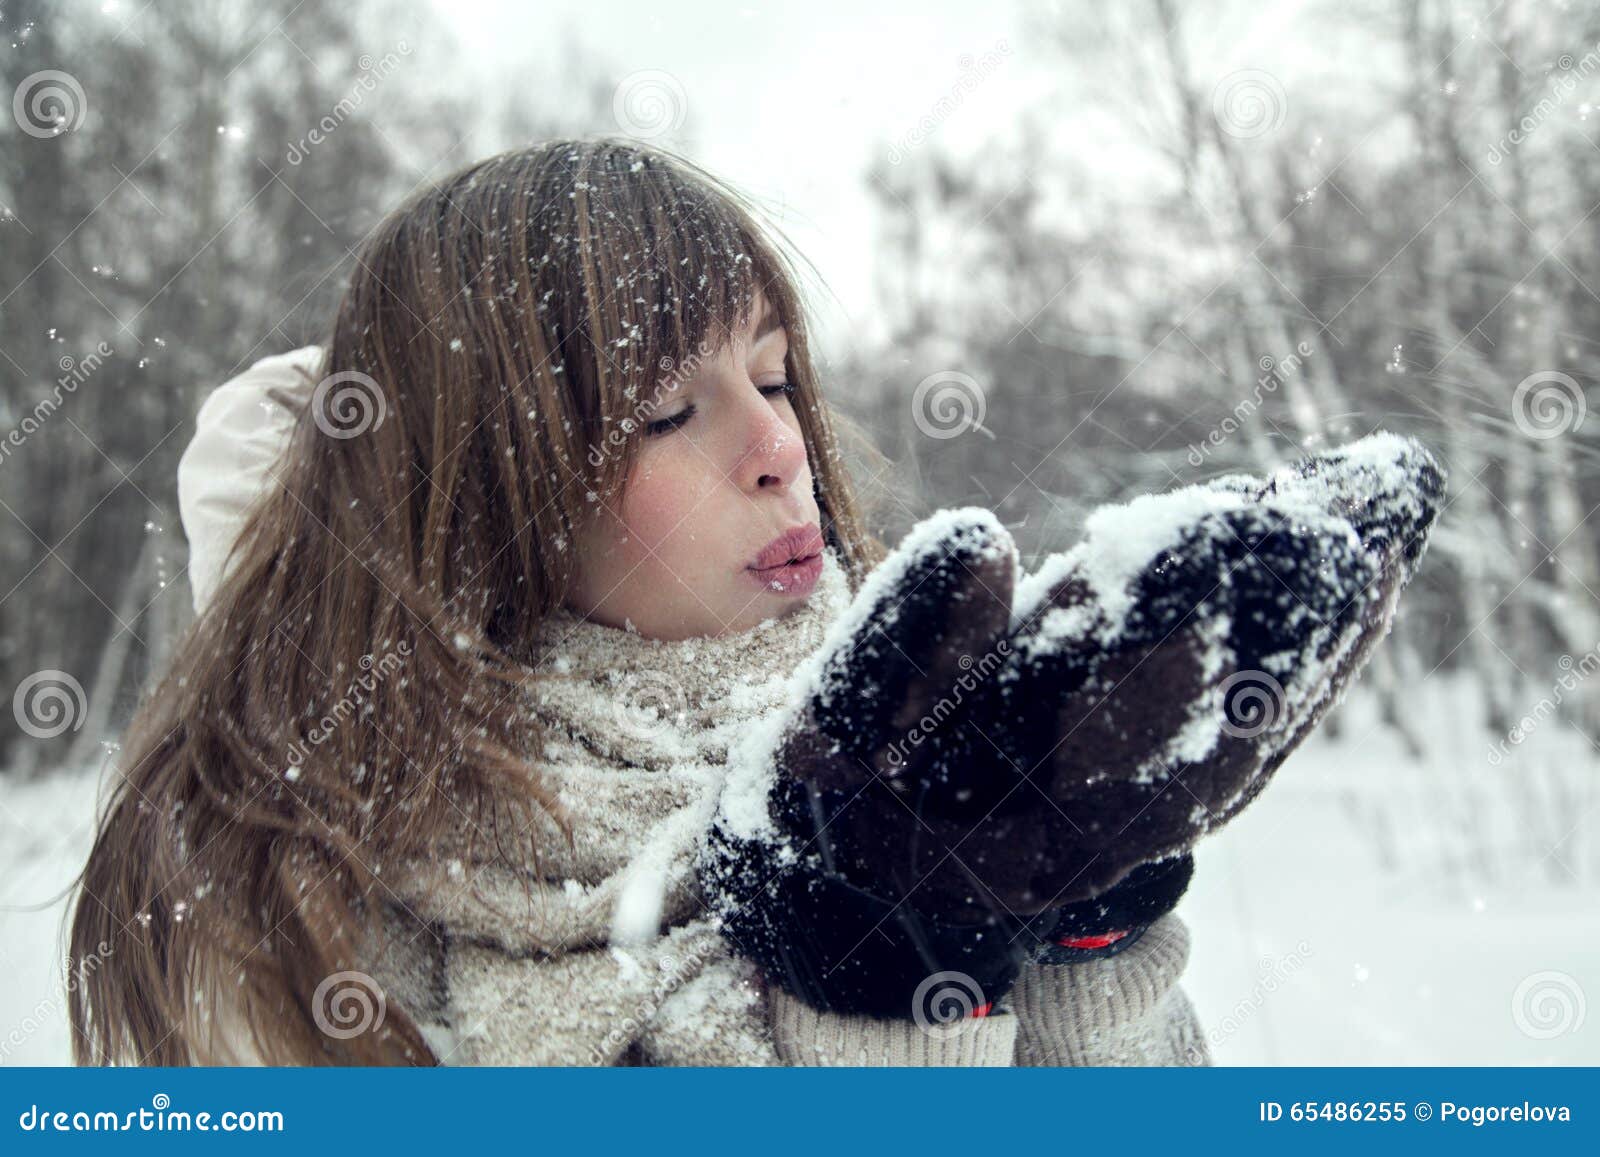 Winter Blondy Woman Blowing Snow on Herself. Attractive Winter Woman ...